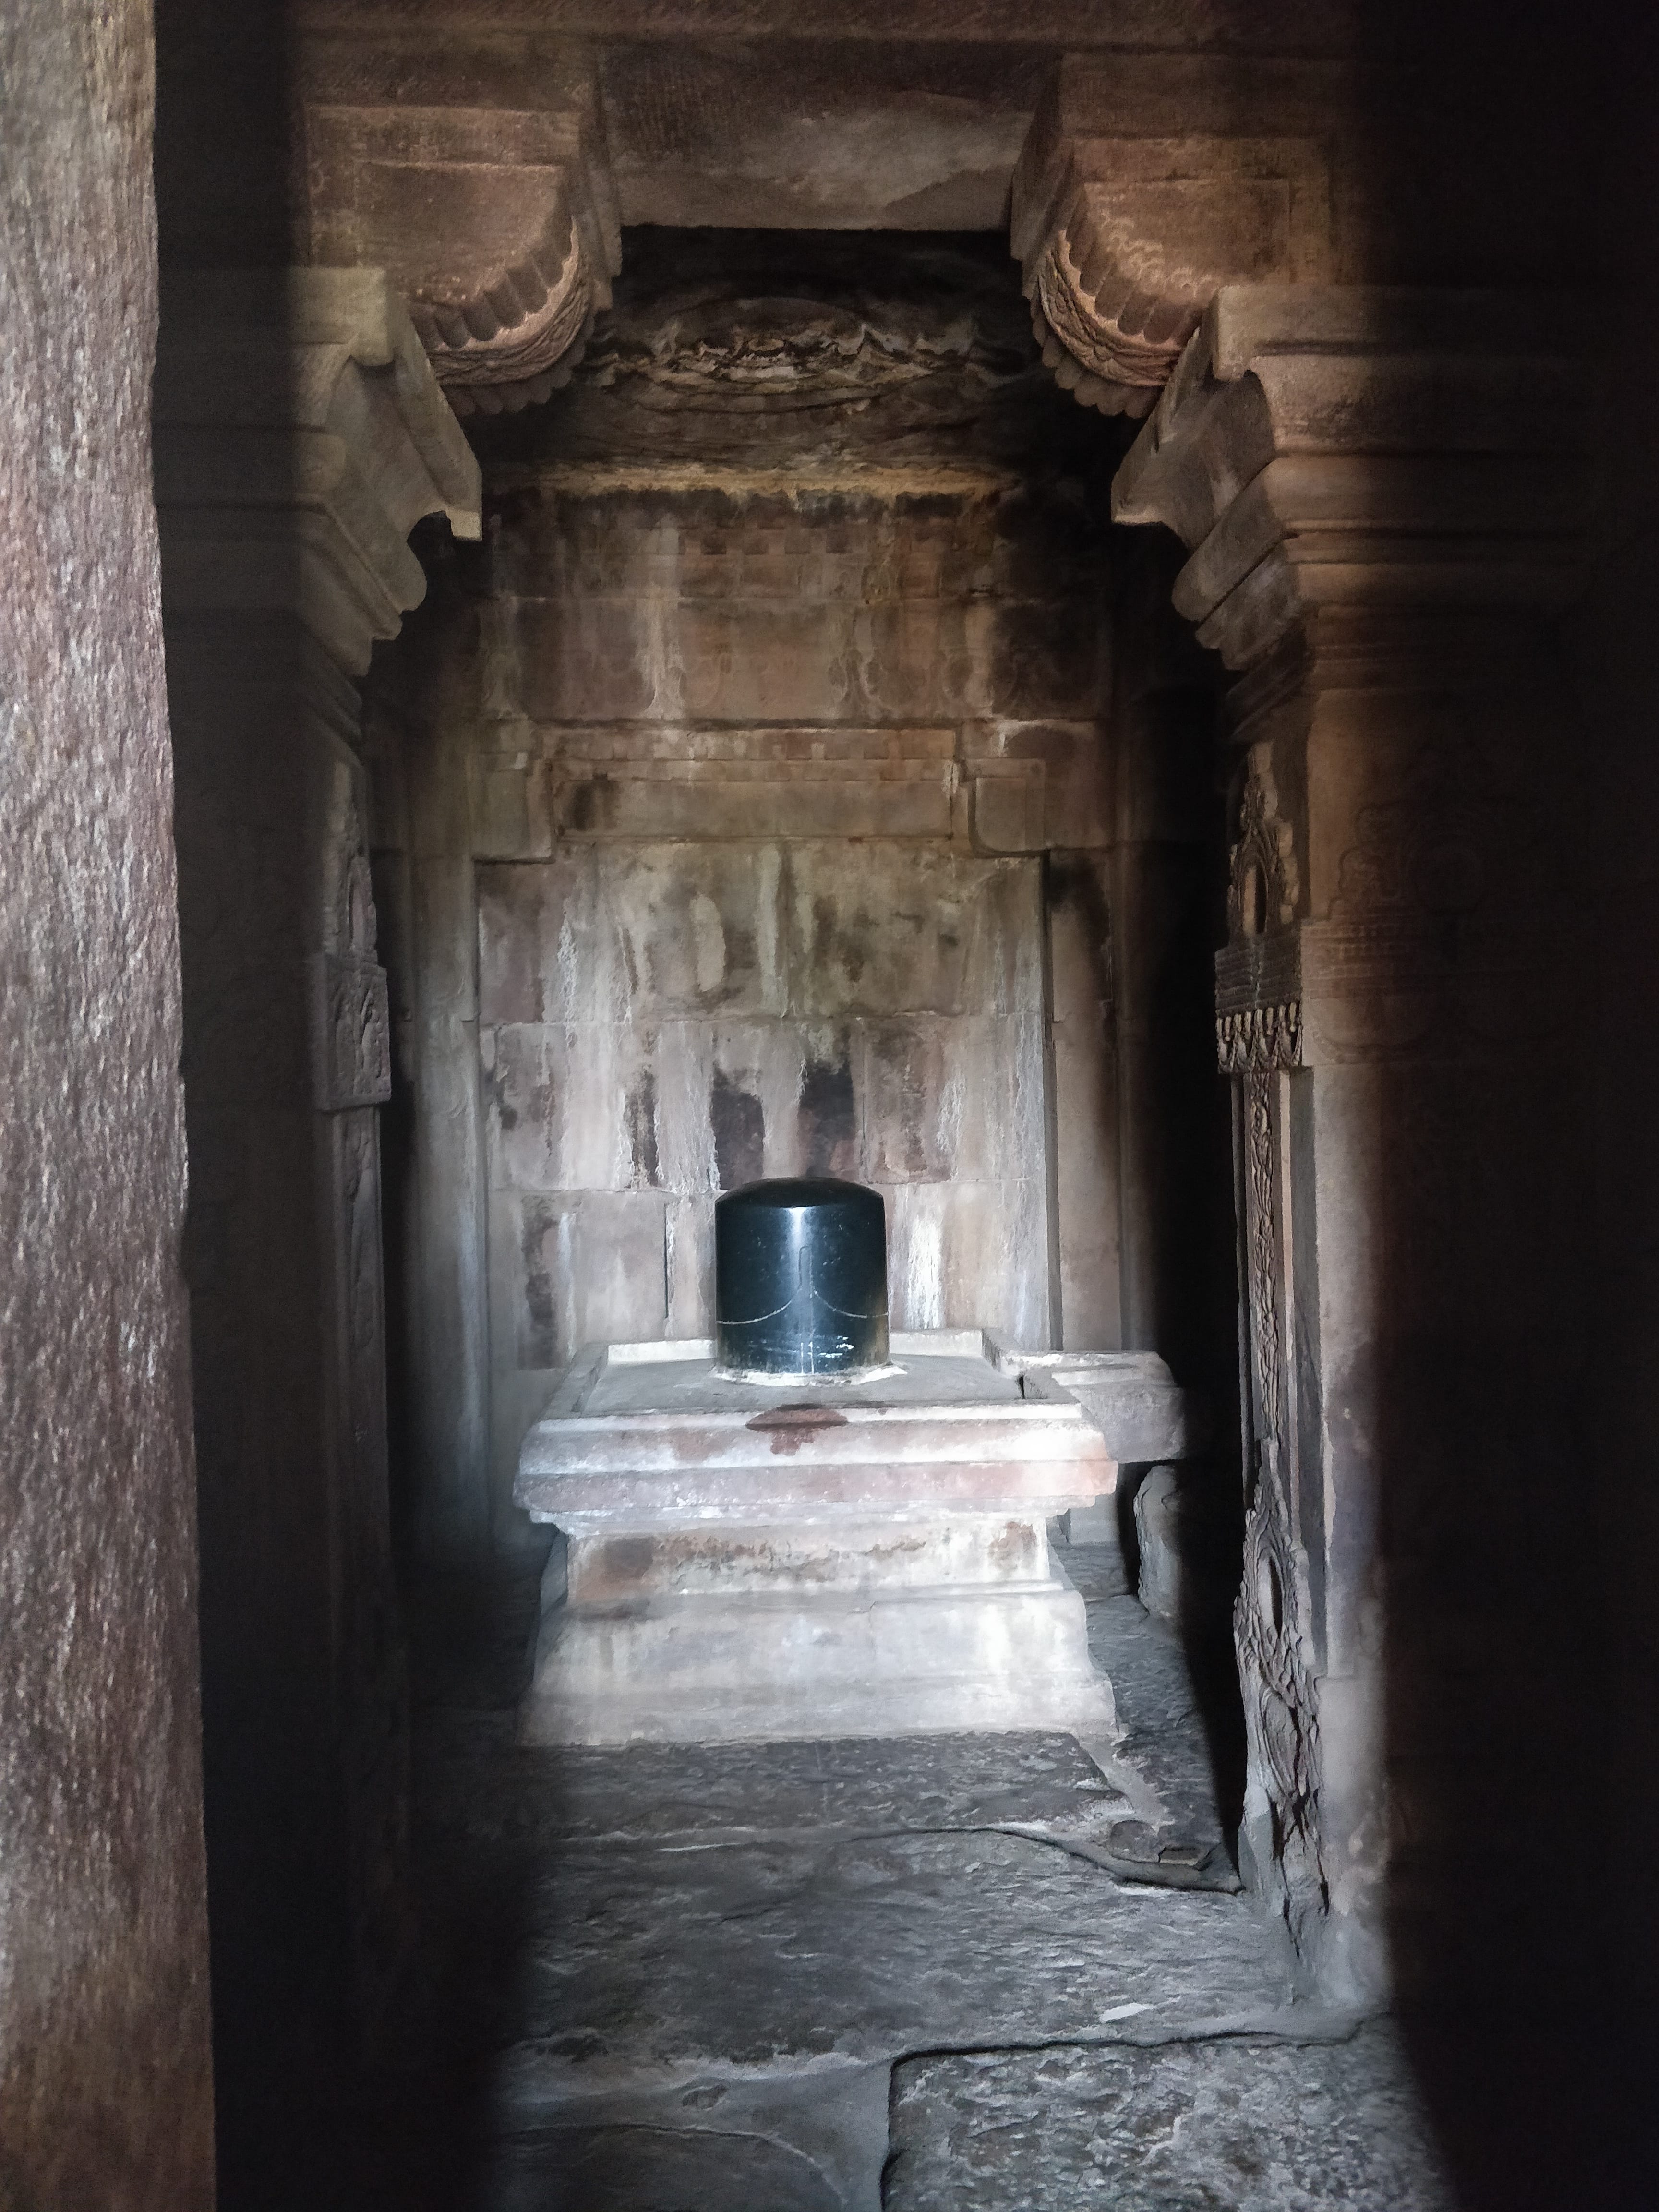 Linga inside one of the temples